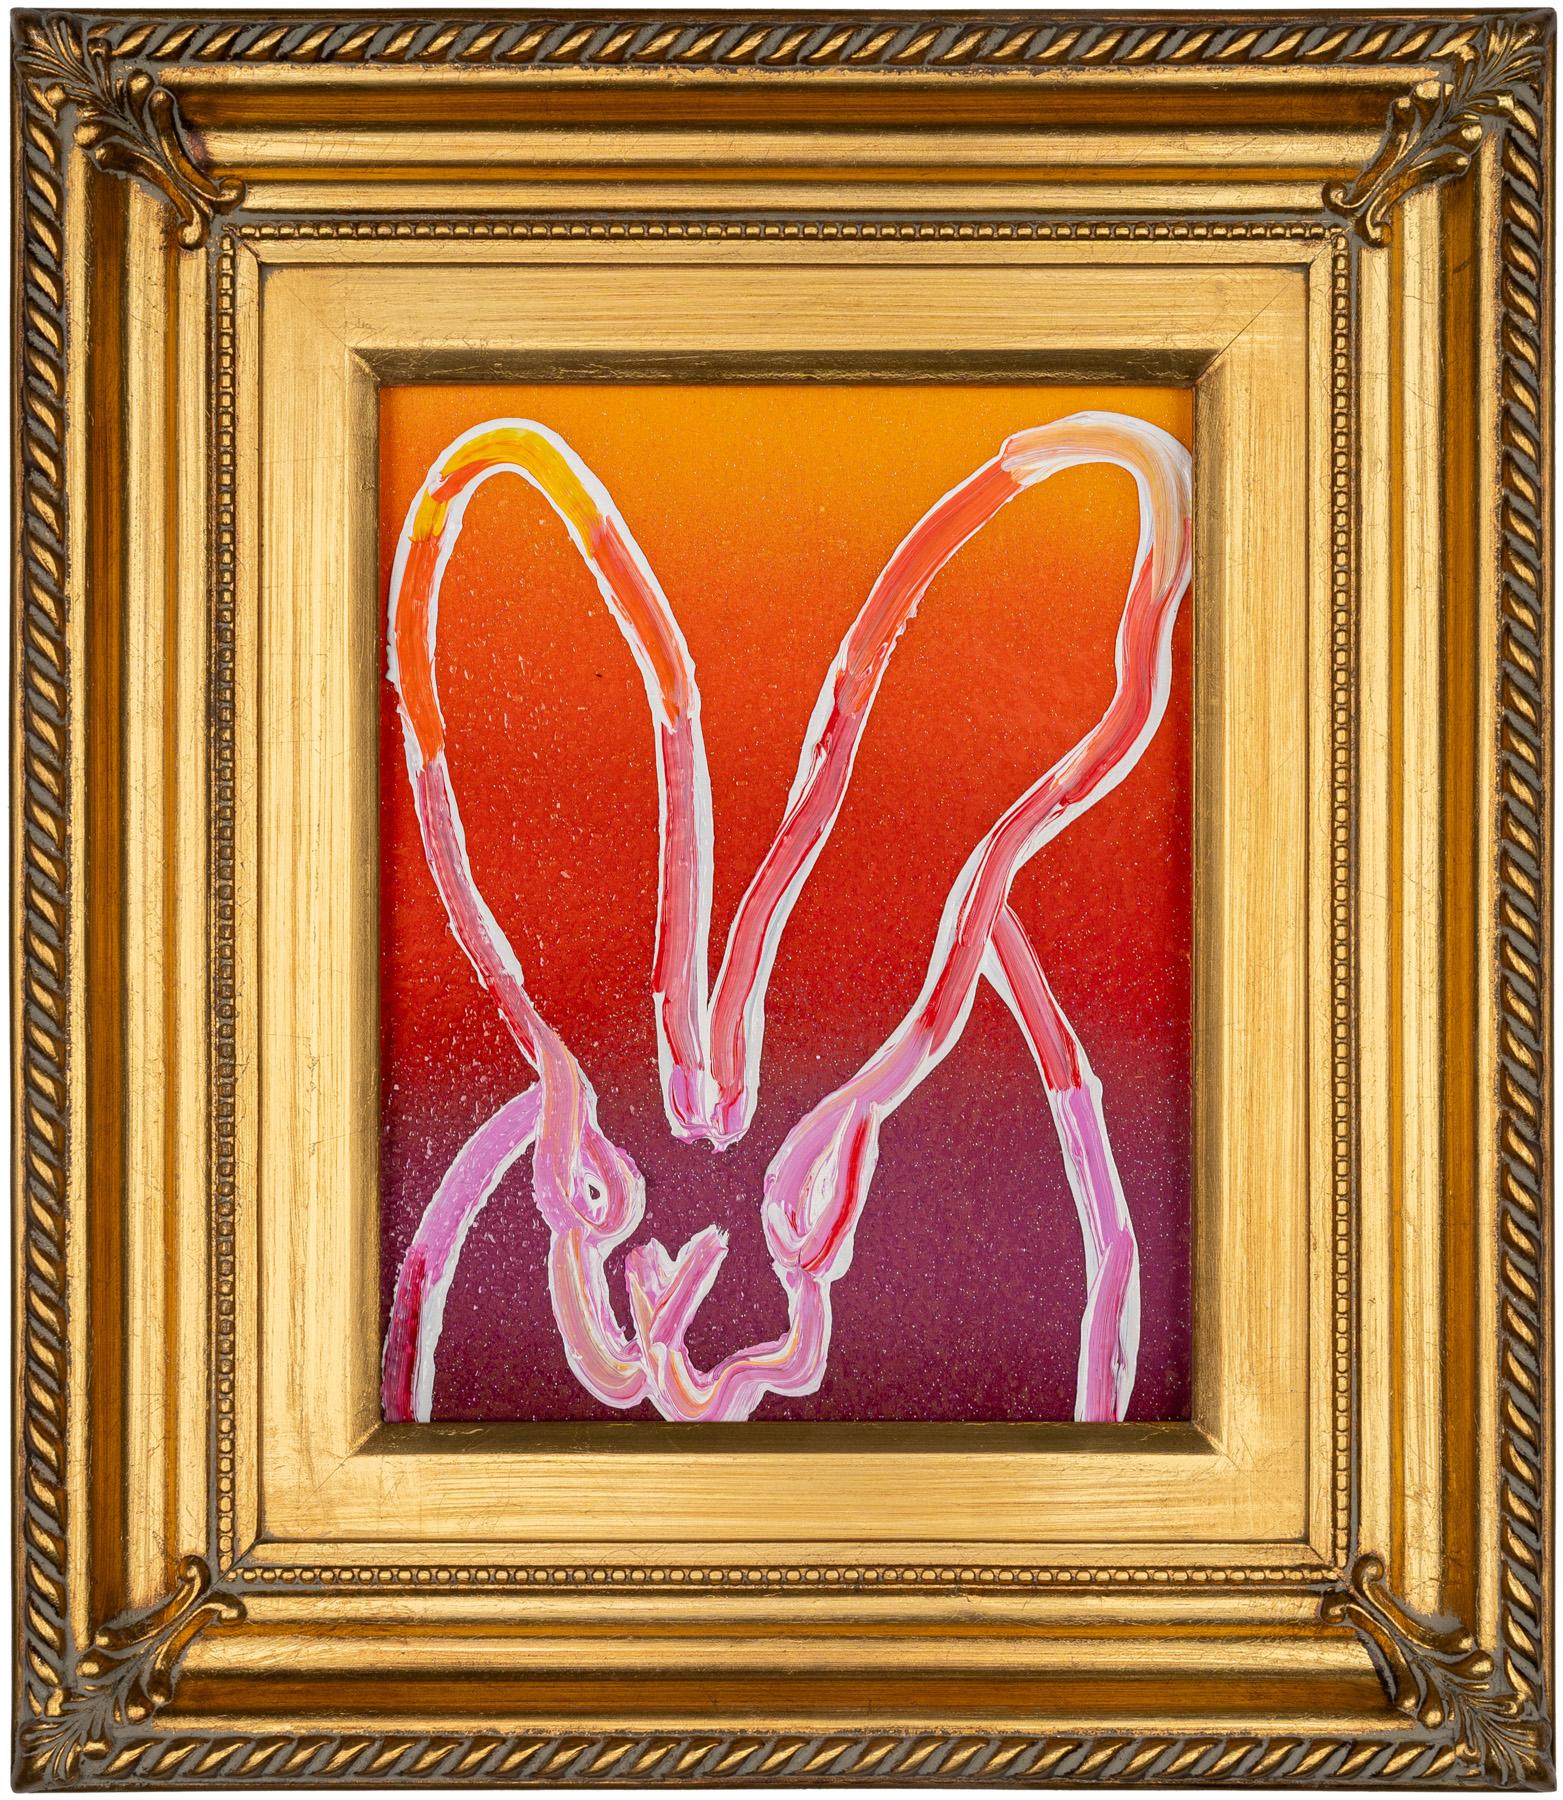 Available at Madelyn Jordon Fine Art. Hunt Slonem bunny oil painting 'Evening' 2023. Oil on wood, 10 x 8 in. / Frame: 16 x 14 in. This painting features Slonem's signature bunny outlined in white over a multicolored background. Framed in a